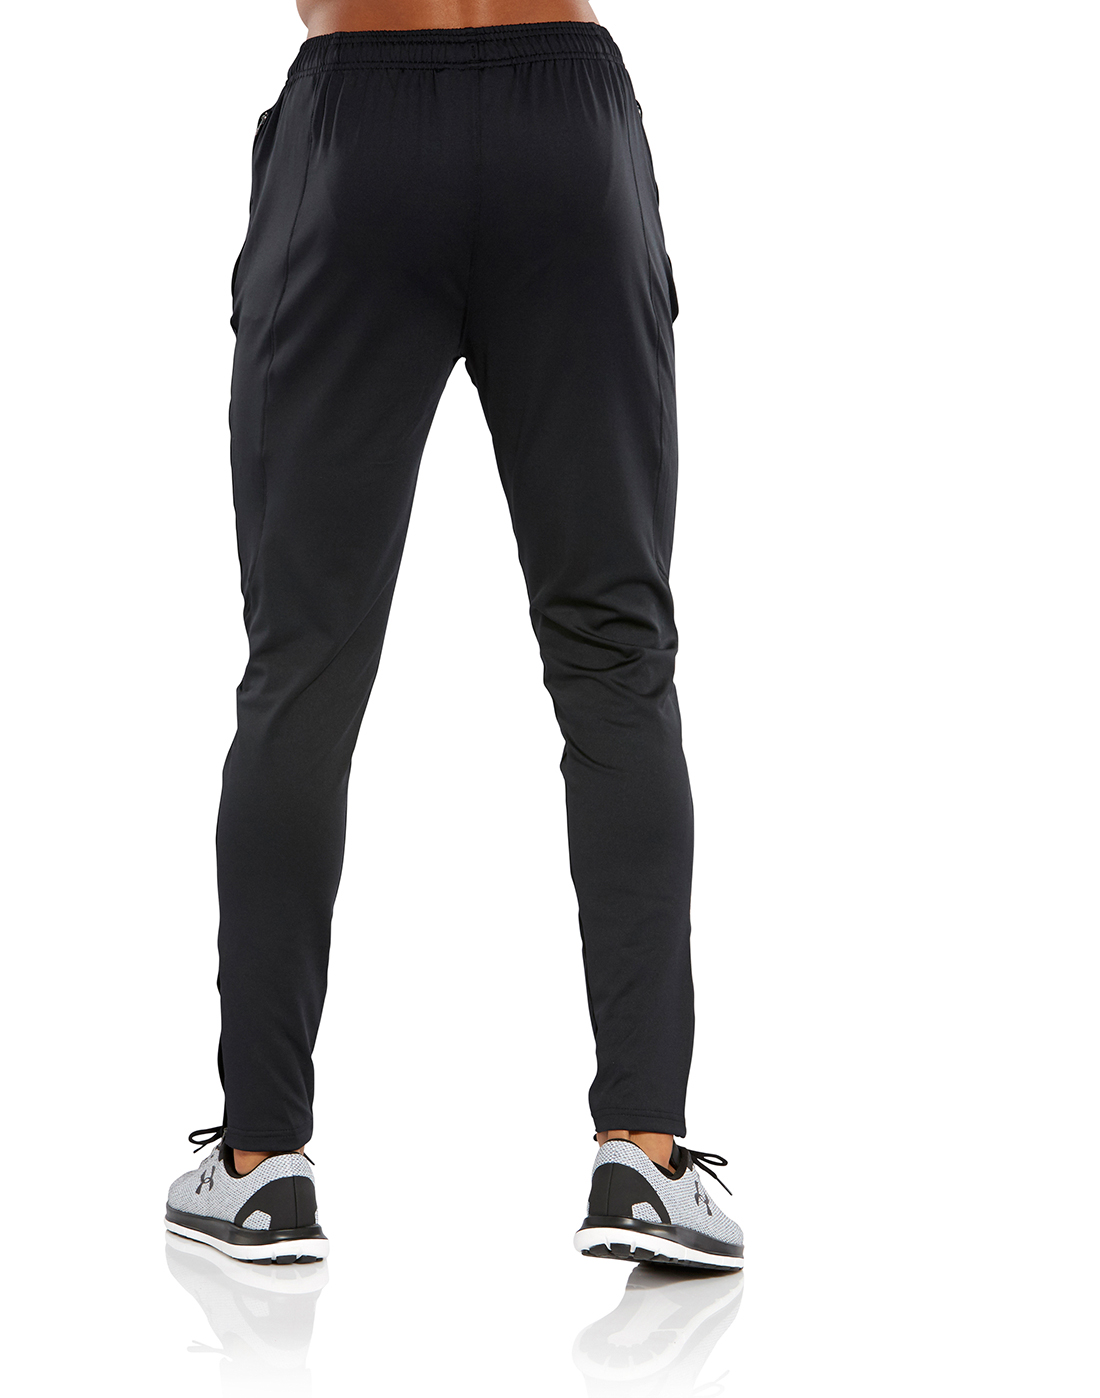 Men's Black Under Armour Challenger Gym Pants | Life Style Sports